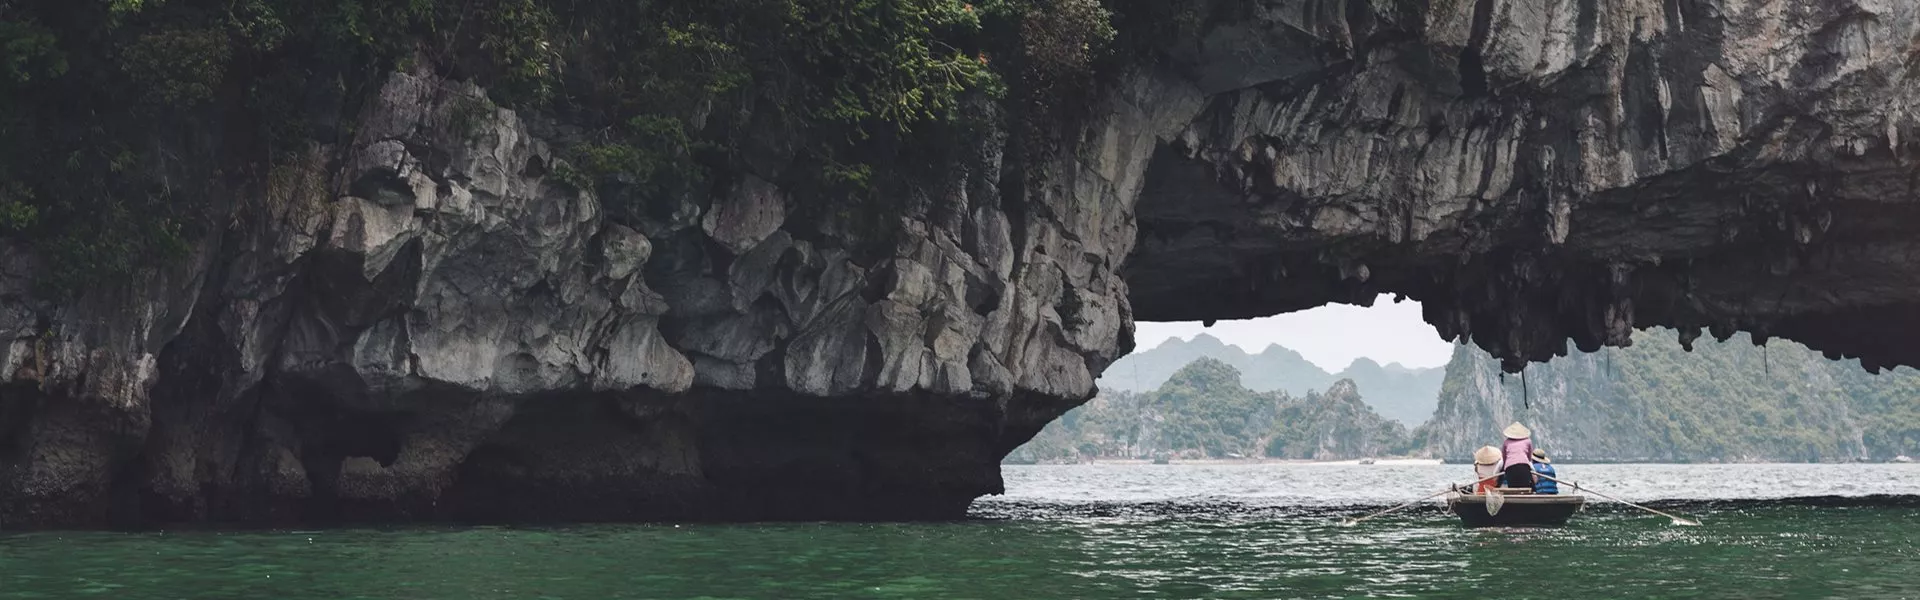 A person in a small boat in Ha Long bay